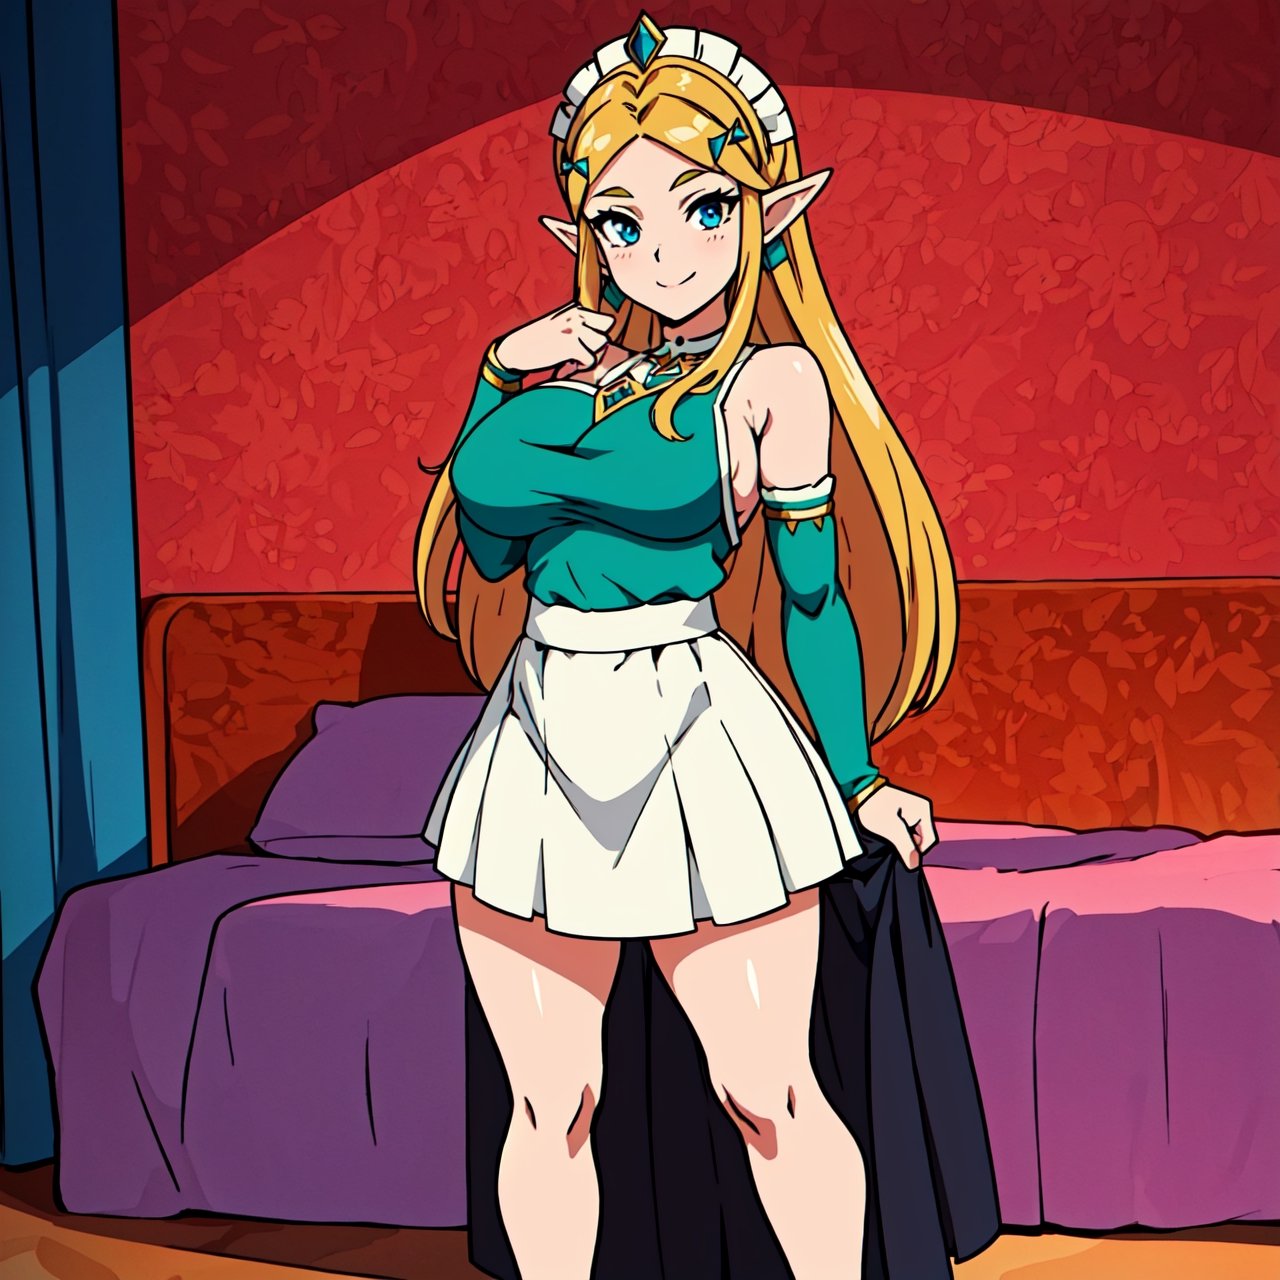 (Full body image:1.5), (Princess Zelda, standing, alone:1.2) ,(large breasts:1.5), (she's wearing black maid attire with very short white skirt/extremely tight outfit on her body:1.3), (she's inside a hotel room in front of a bed:1.3), she has (blue eyes, dark green mohawk hair:1.2), (she's smiling, looking at the viewer. exhibitionist pose:1.2), anime style, 16k, best quality, high details, textured skin, UHD, masterpiece, anatomically correct